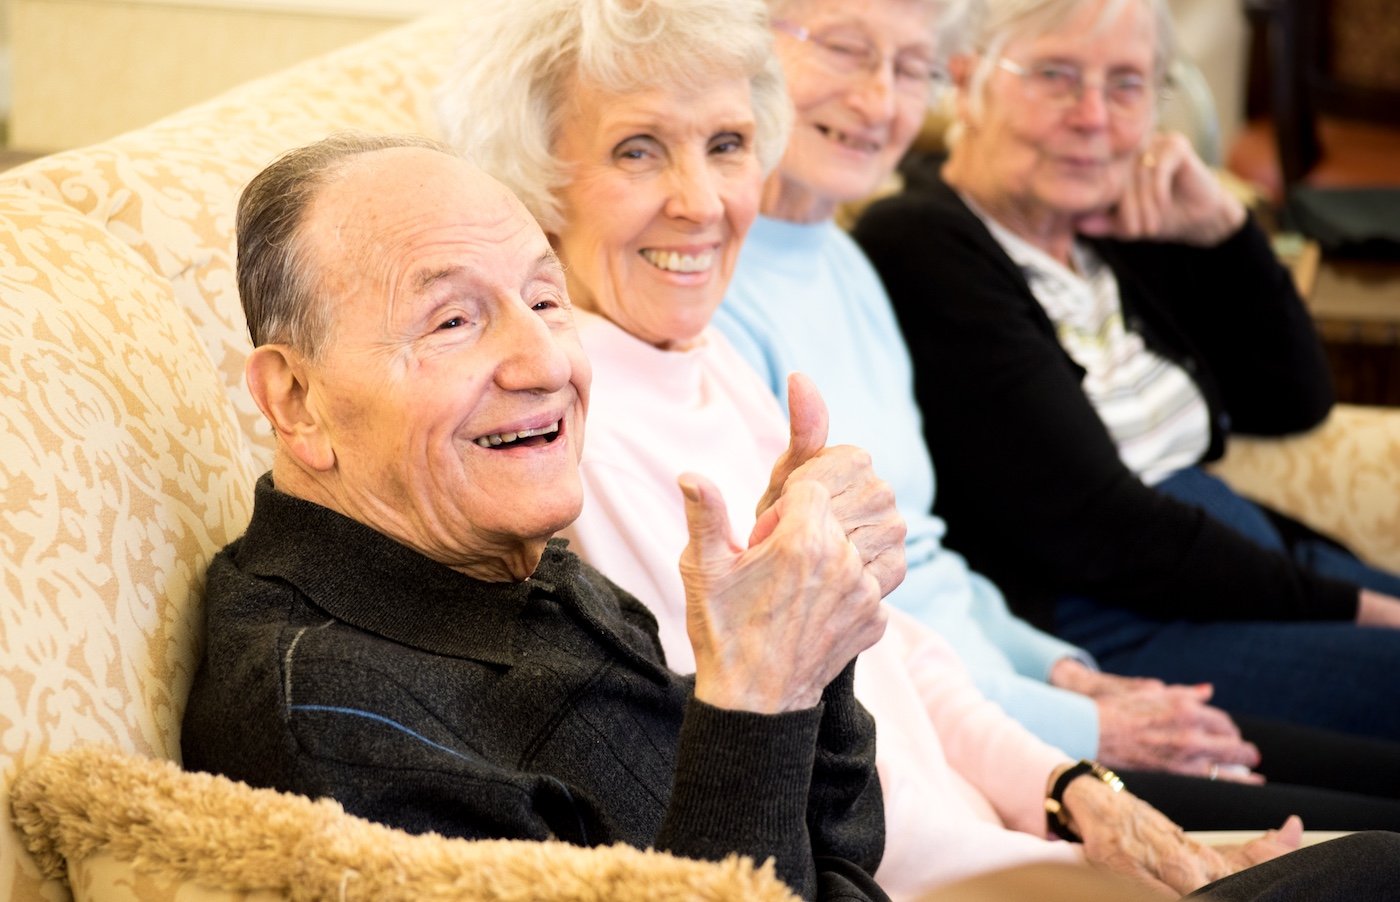 Group of seniors laughing as one man gives a thumbs-up in the foreground